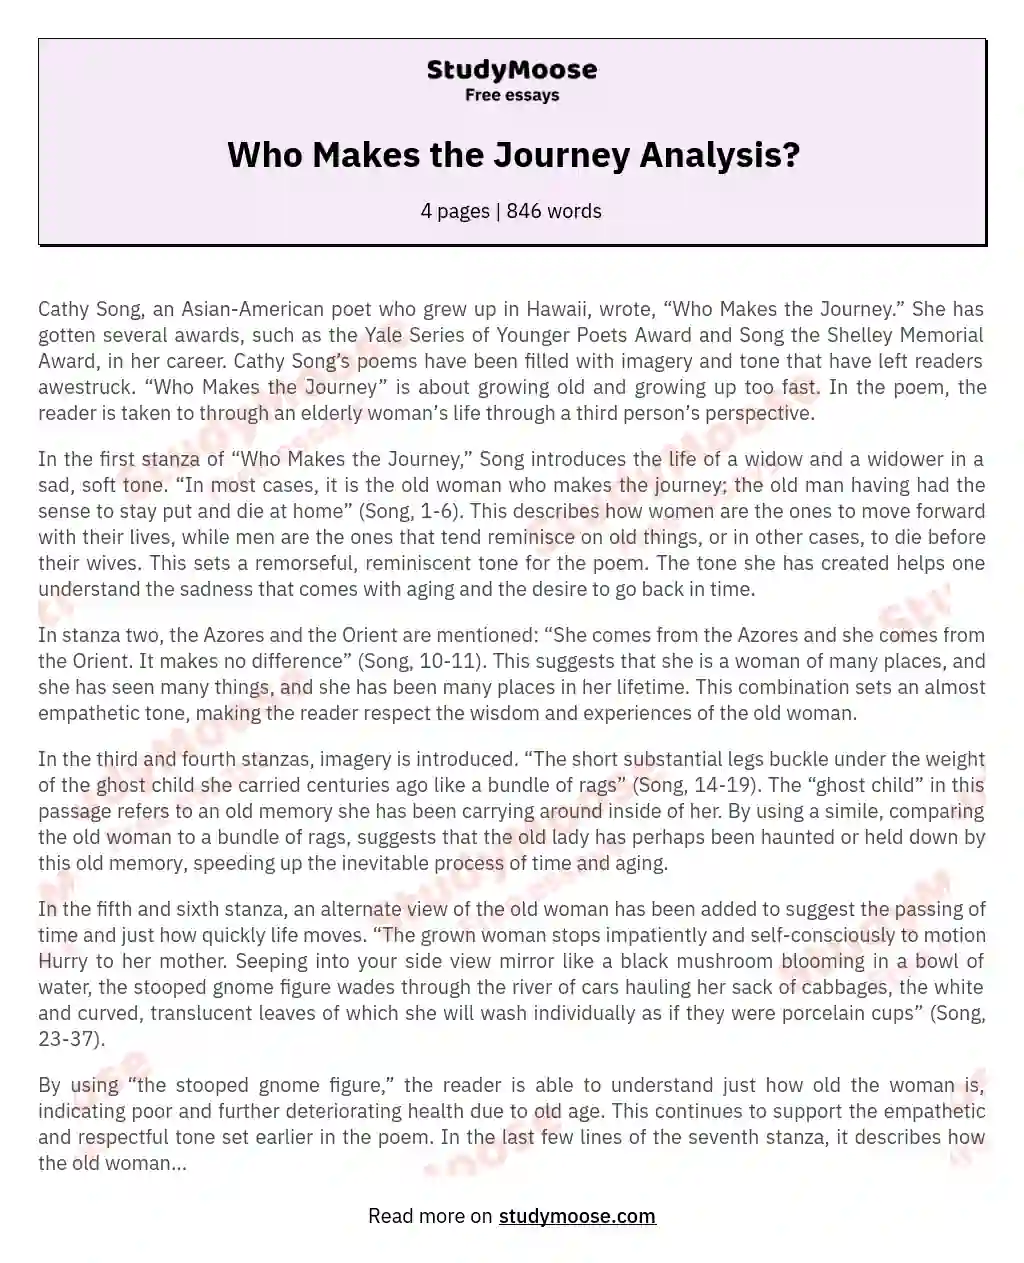 Who Makes the Journey Analysis? essay